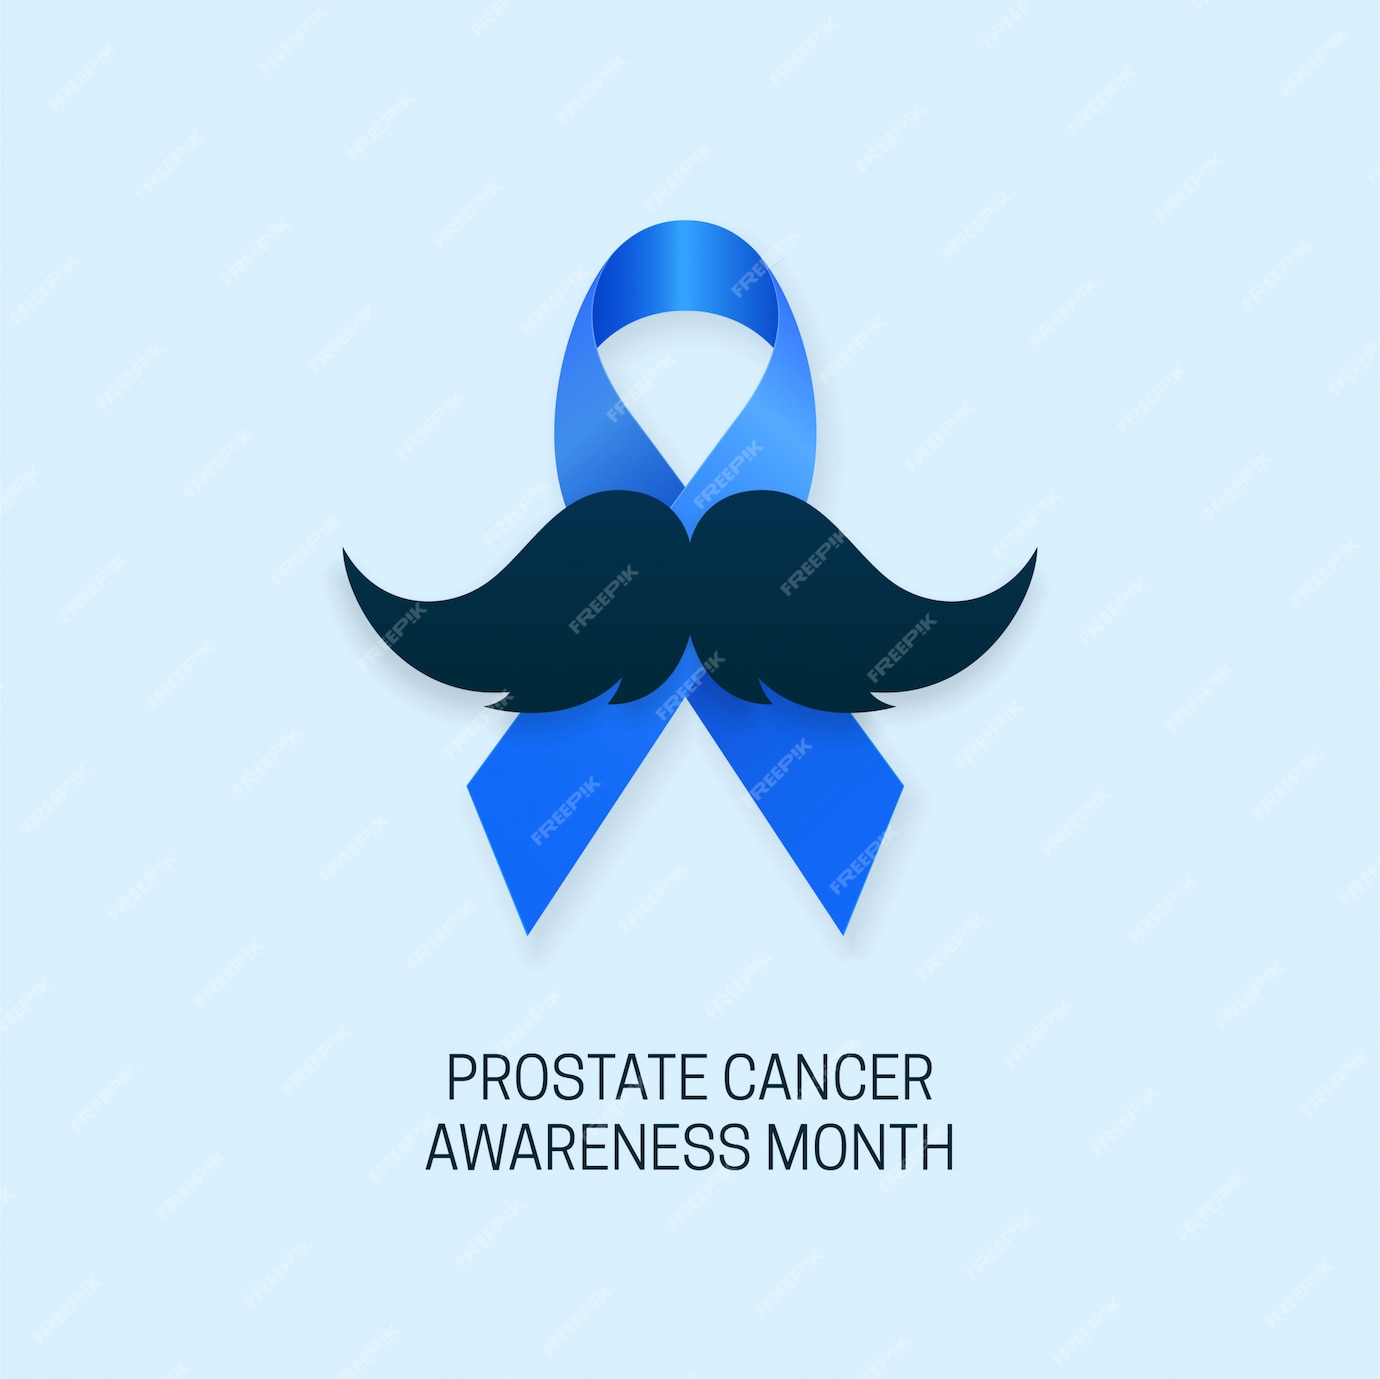 Premium Vector Prostate Cancer Awareness Month Campaign Design With Blue Ribbon And Mustache 1172